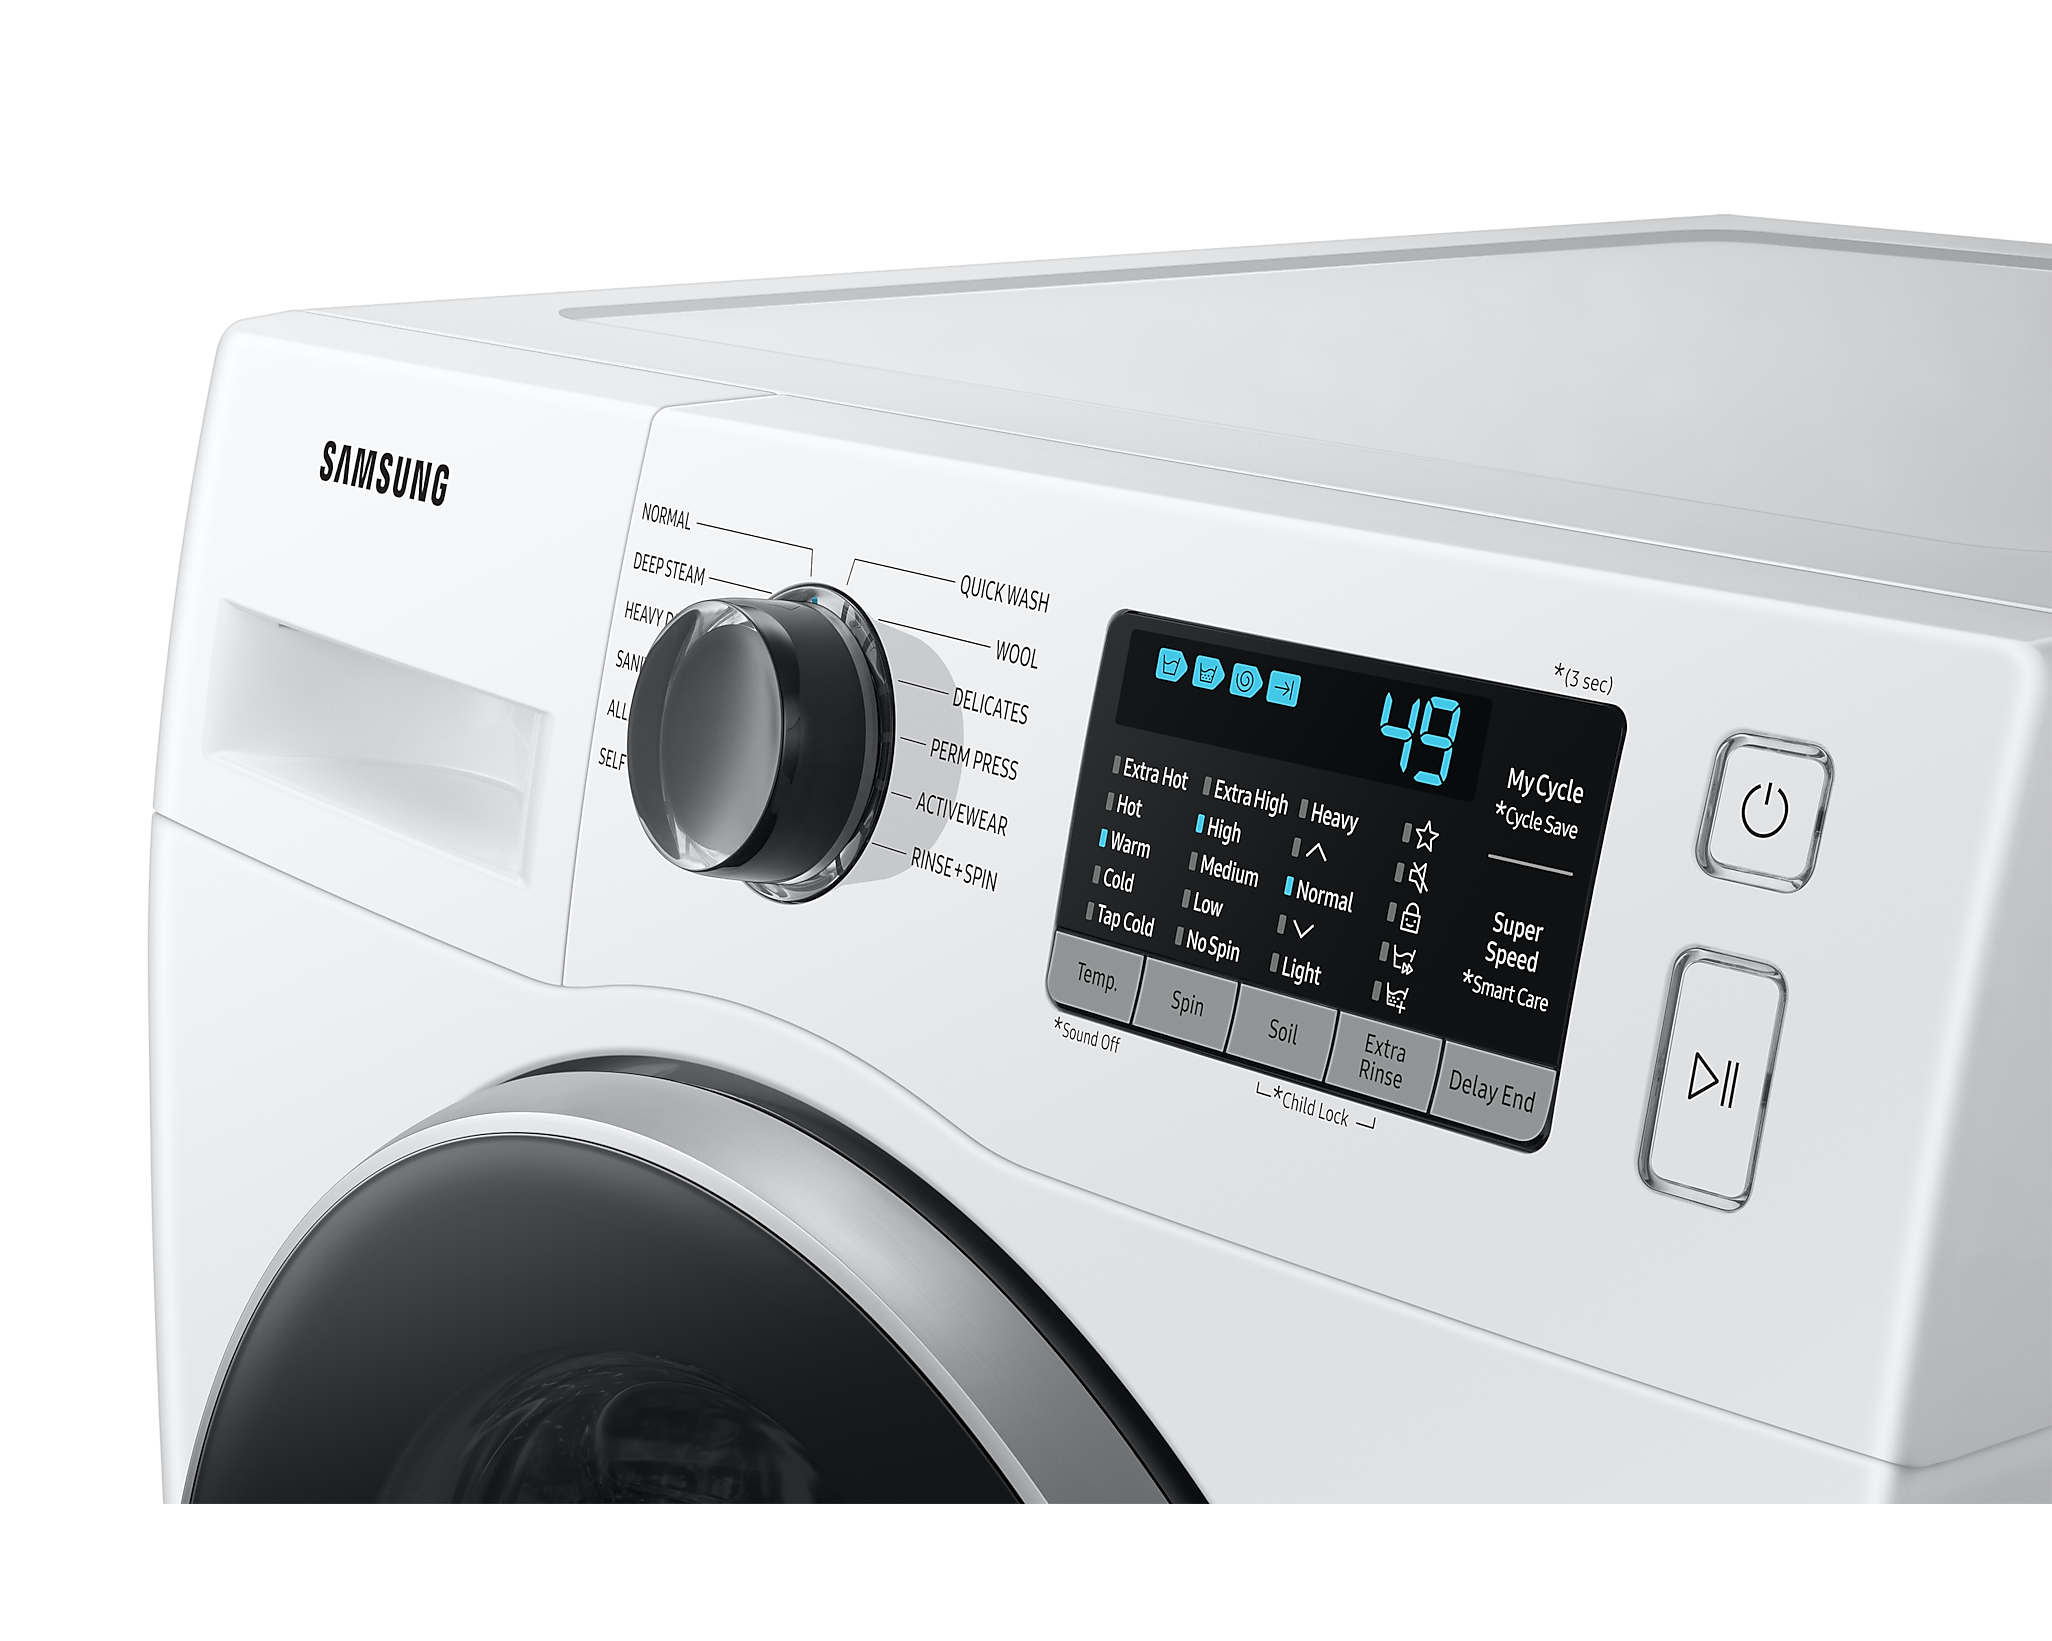 Samsung - 2.9 cu. Ft  Front Load Washer in White - WW25B6800AW